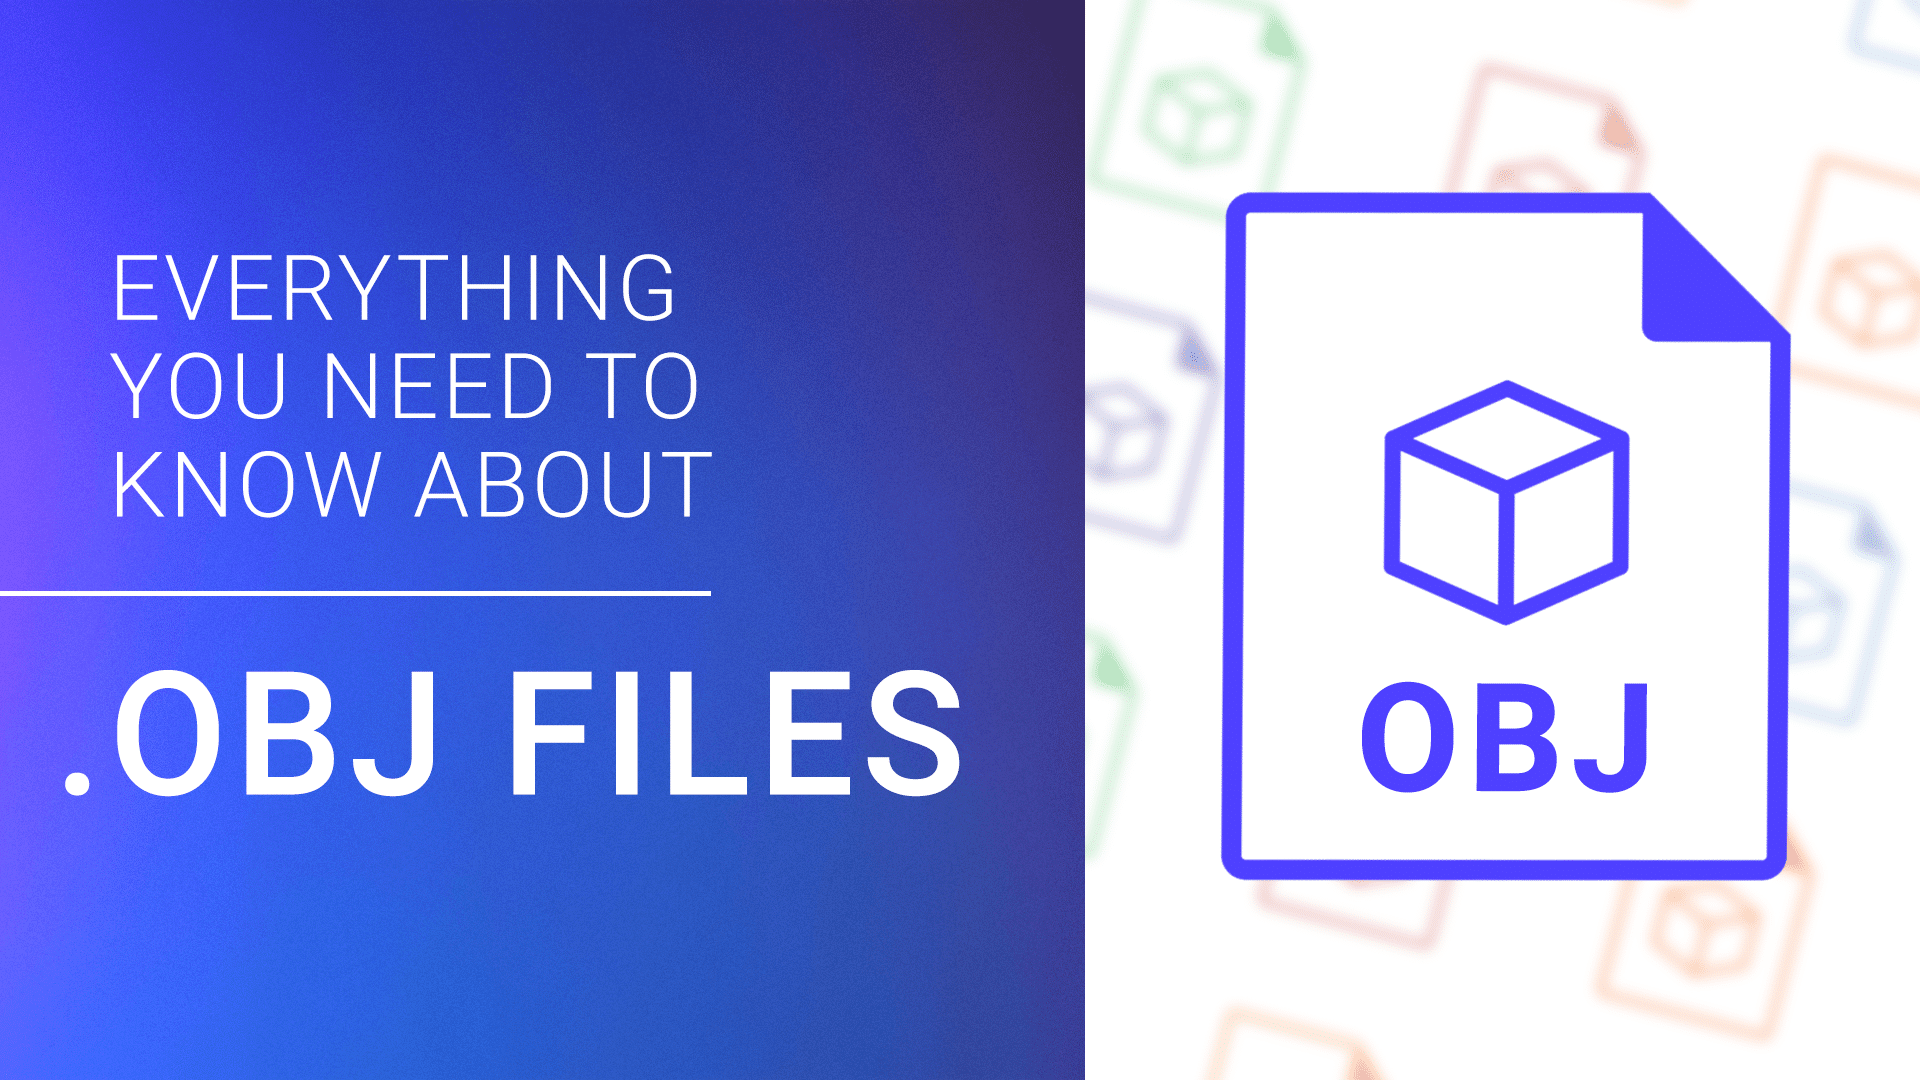 Everything You Need To Know About OBJ Files